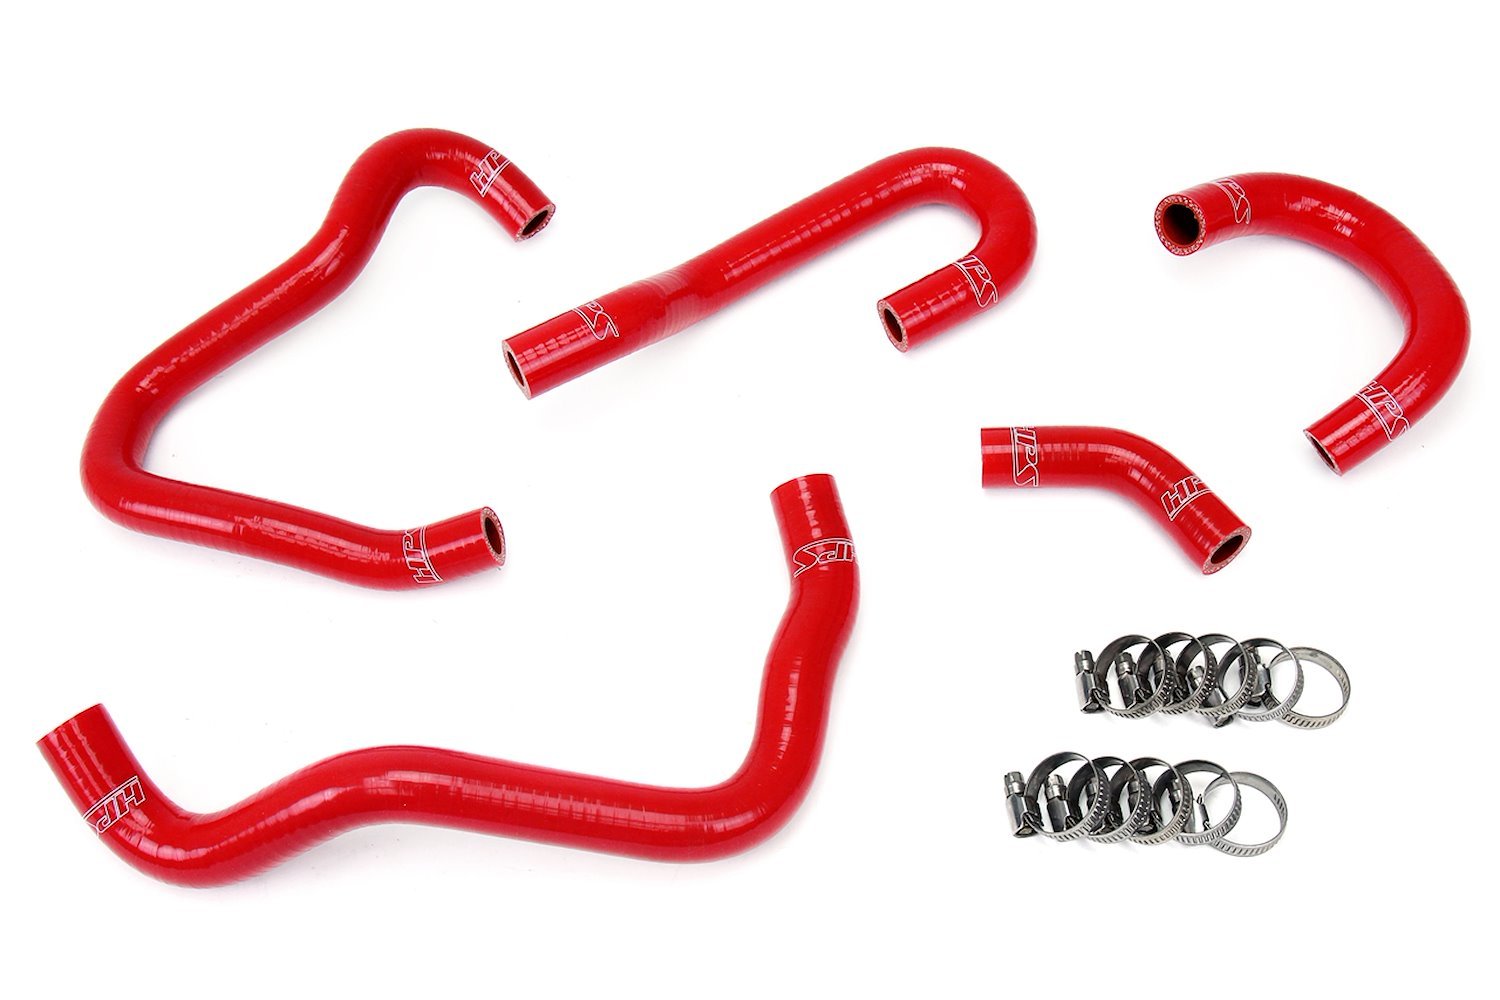 57-1414-RED Heater Hose Kit, High-Temp 3-Ply Reinforced Silicone, Replace OEM Rubber Heater Coolant Hoses